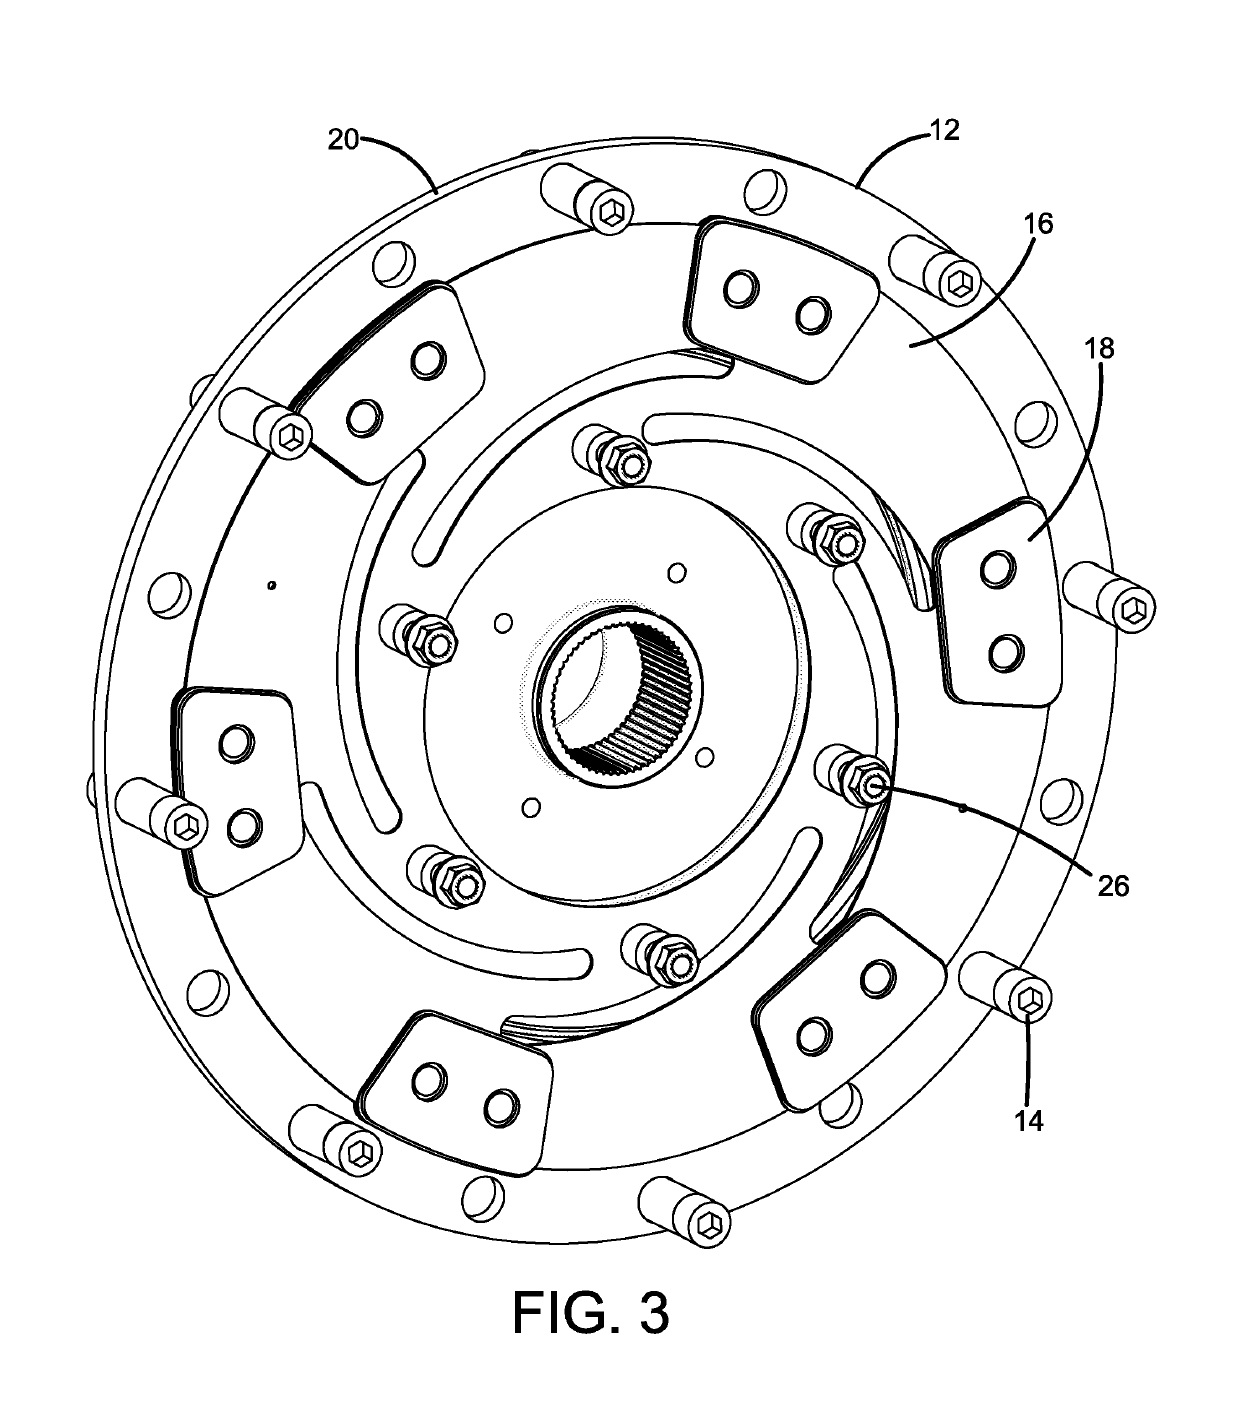 Self-contained clutch for diesel engines